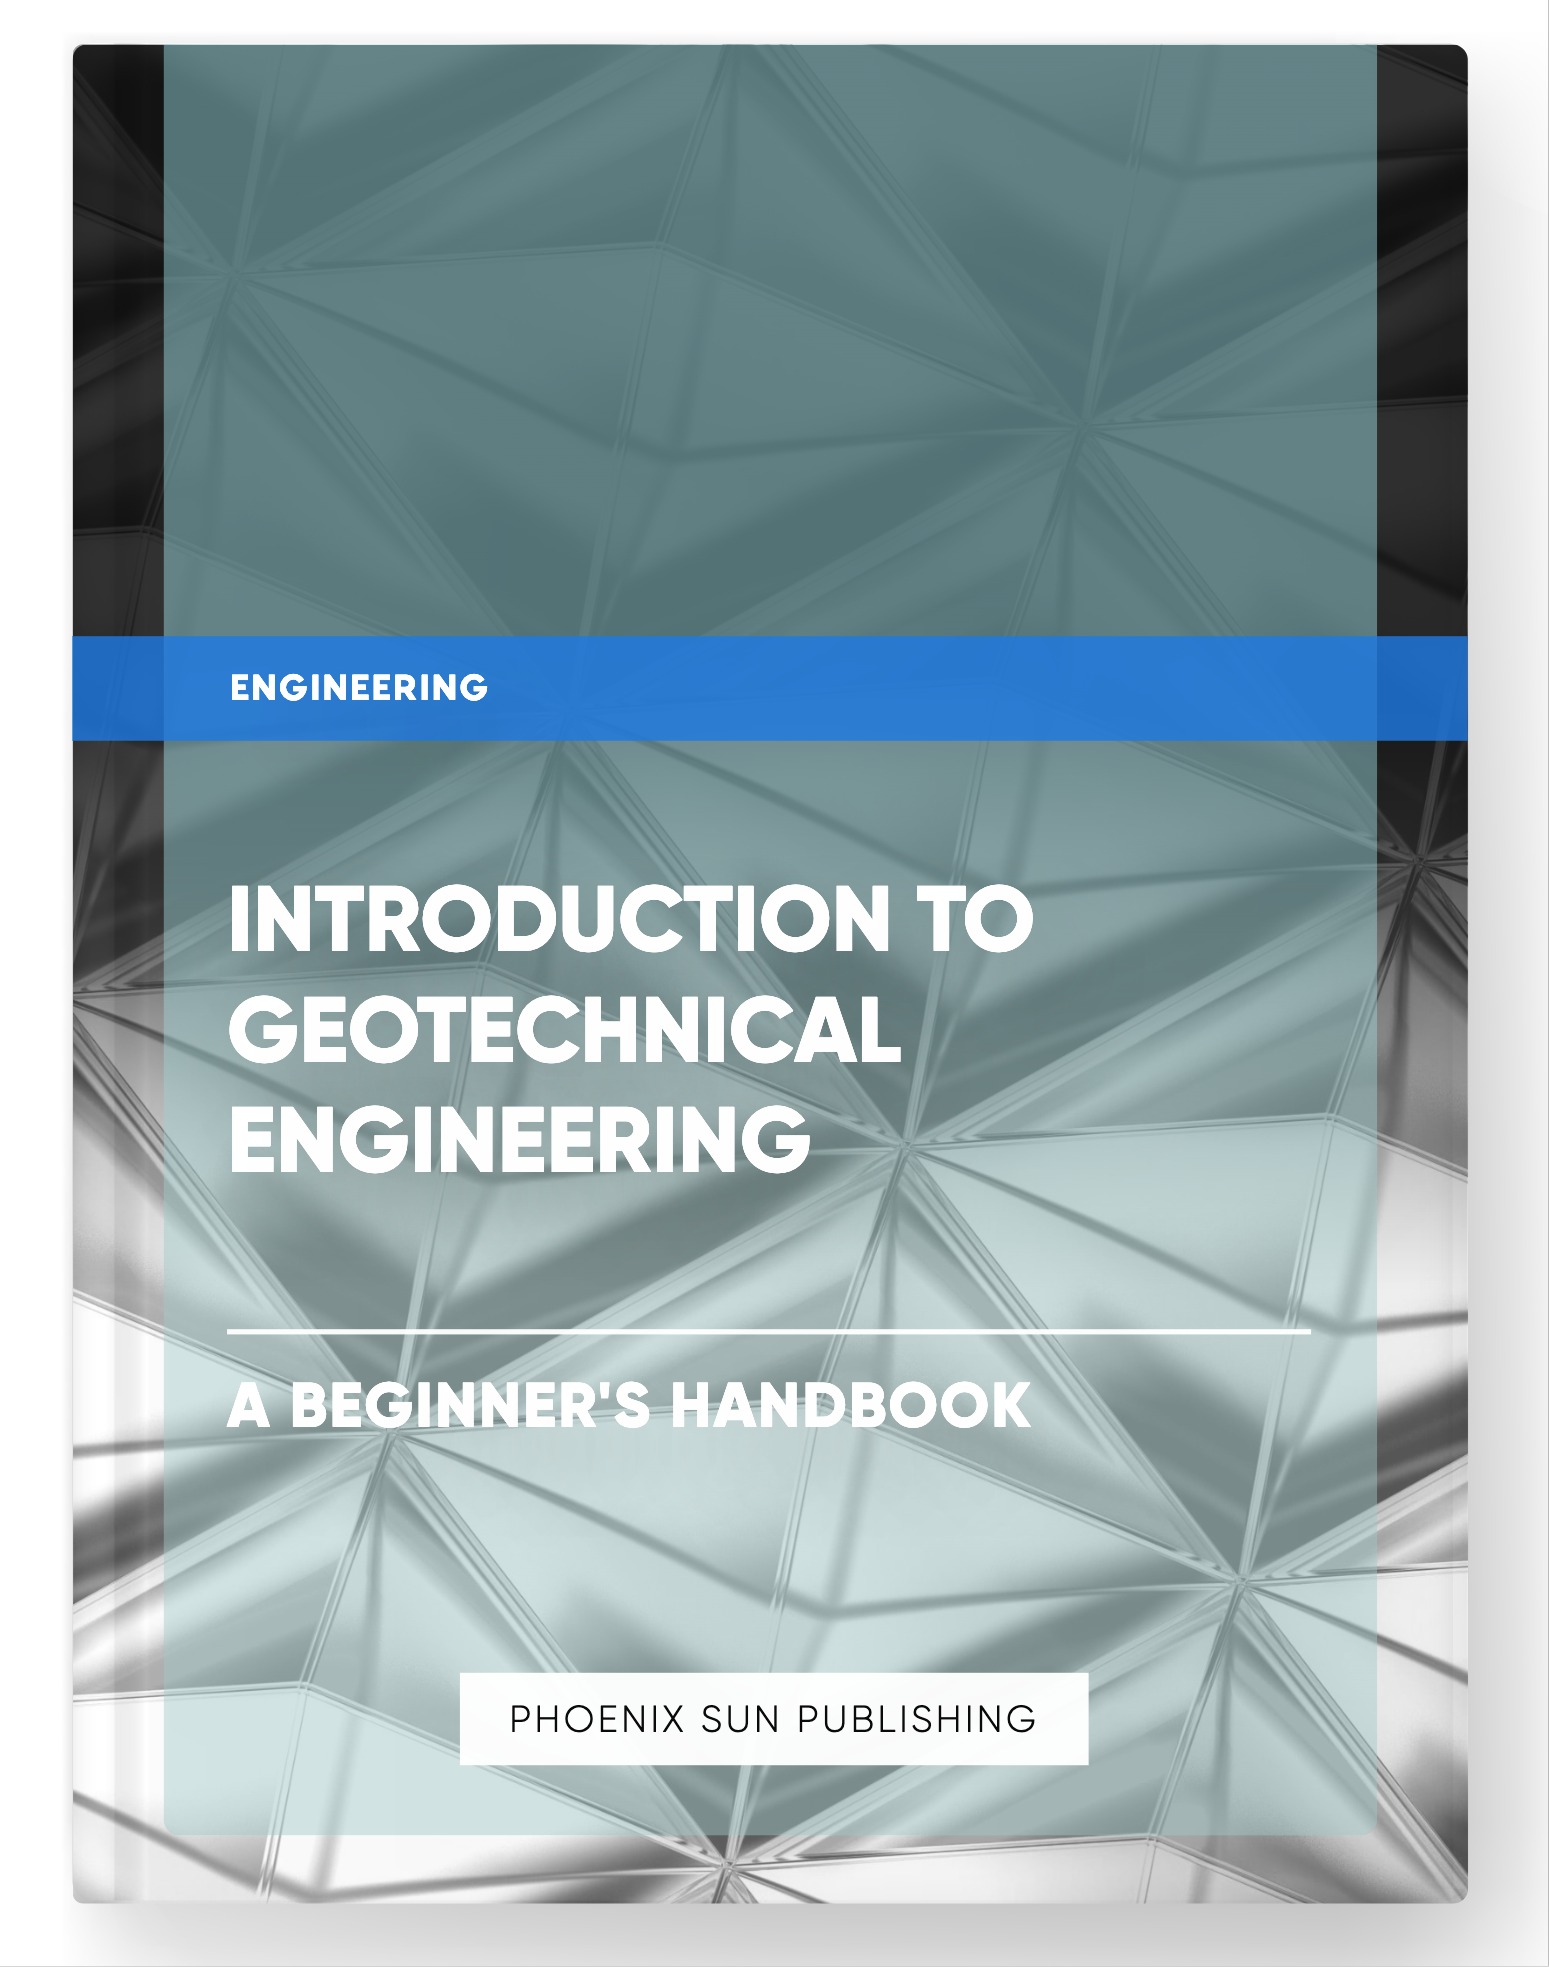 Introduction to Geotechnical Engineering – A Beginner’s Handbook